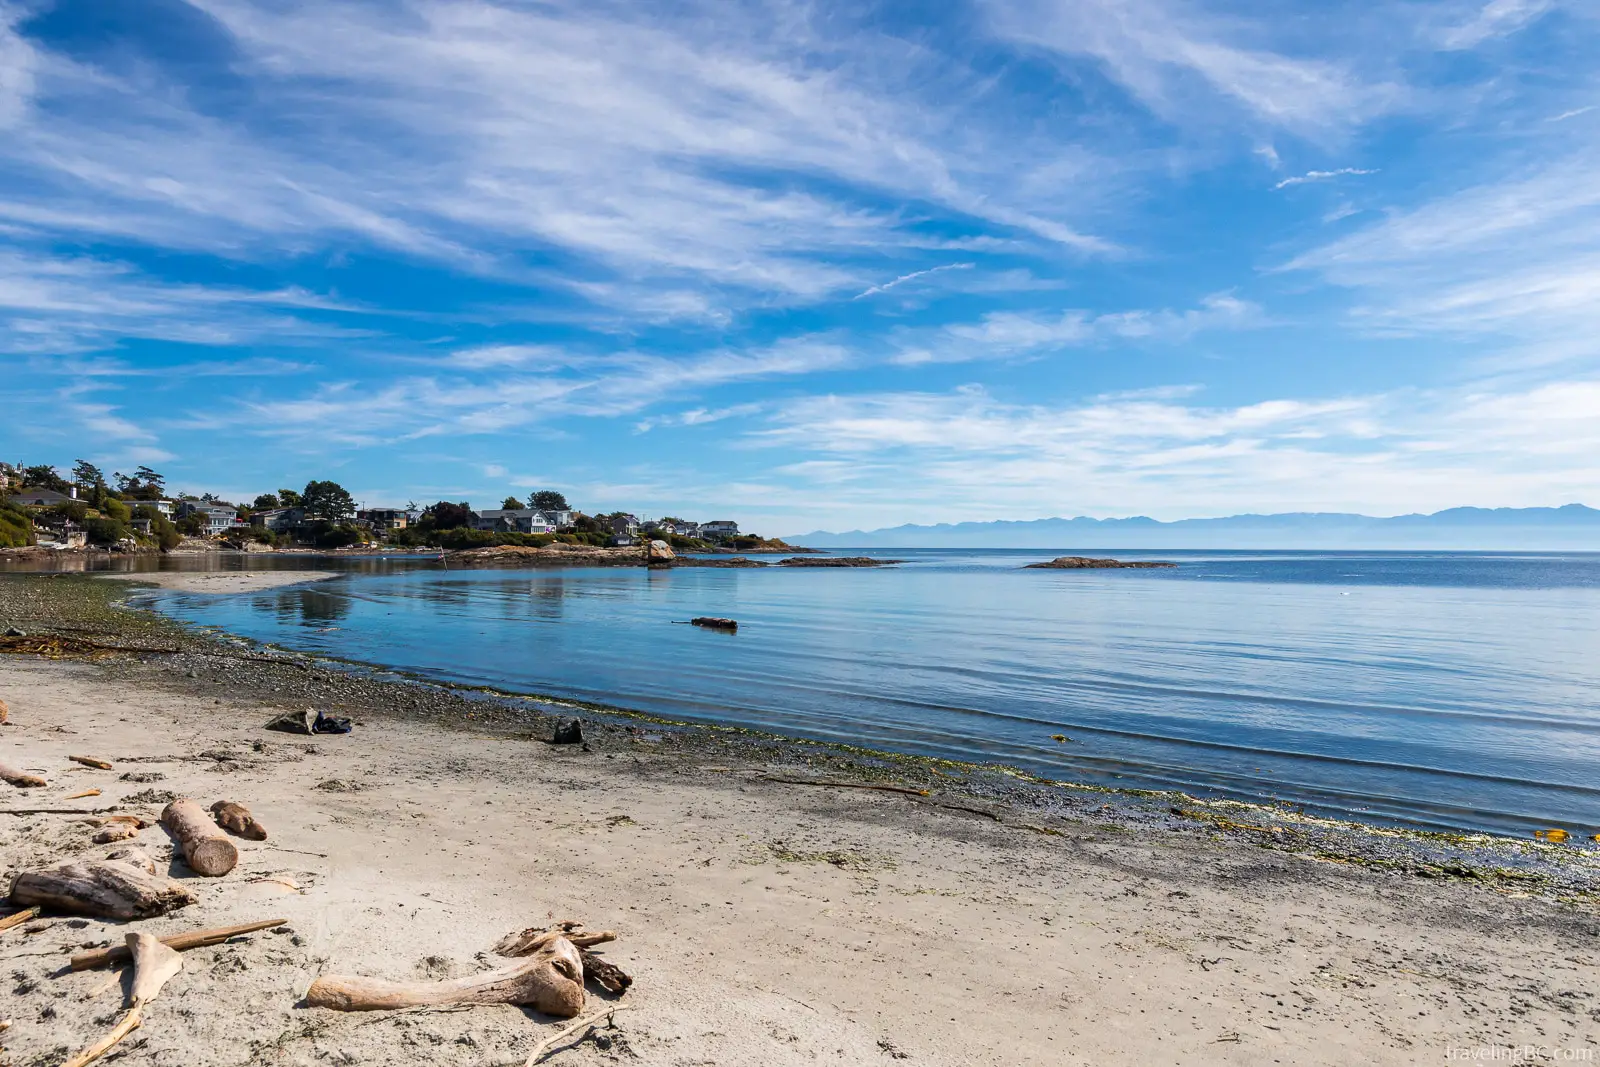 Gonzales Beach, one of the many beautiful beaches in Victoria, BC